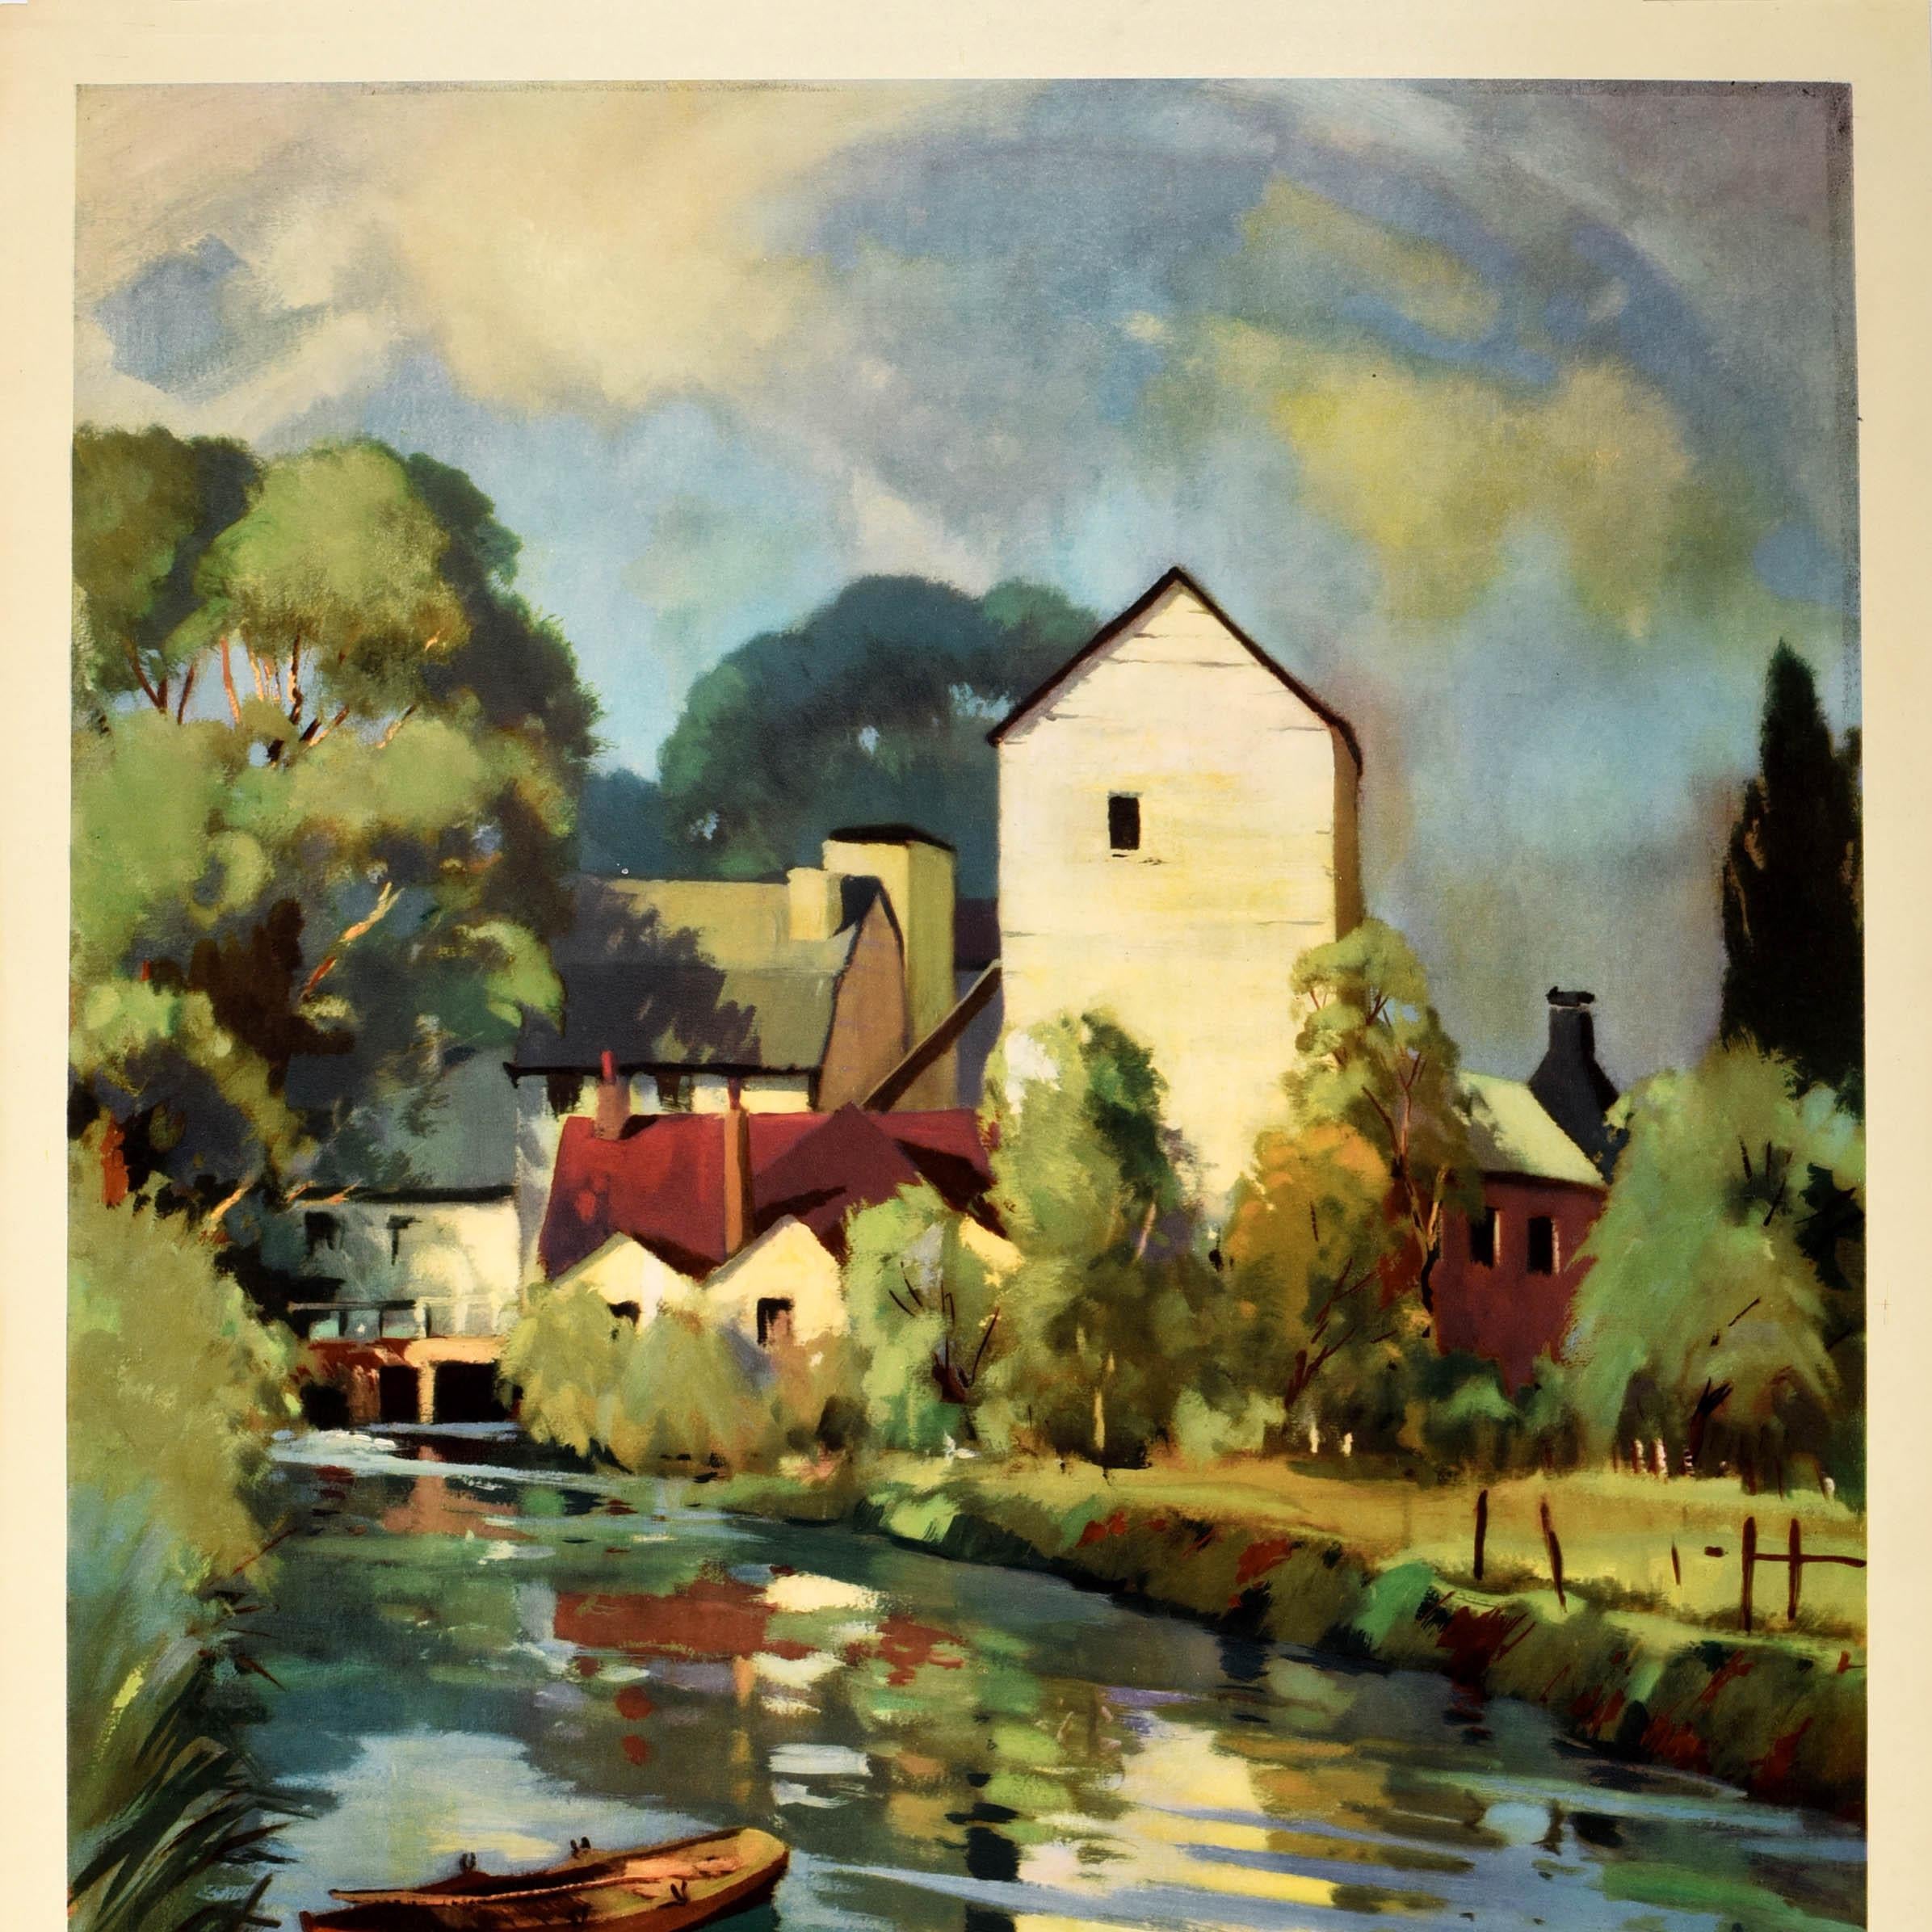 Original vintage railway travel poster for Hertfordshire See Britain by Train featuring scenic artwork by the landscape watercolour painter Edward Wesson (1910-1983) depicting the River Stort in the historic town of Sawbridgeworth with rowing boats